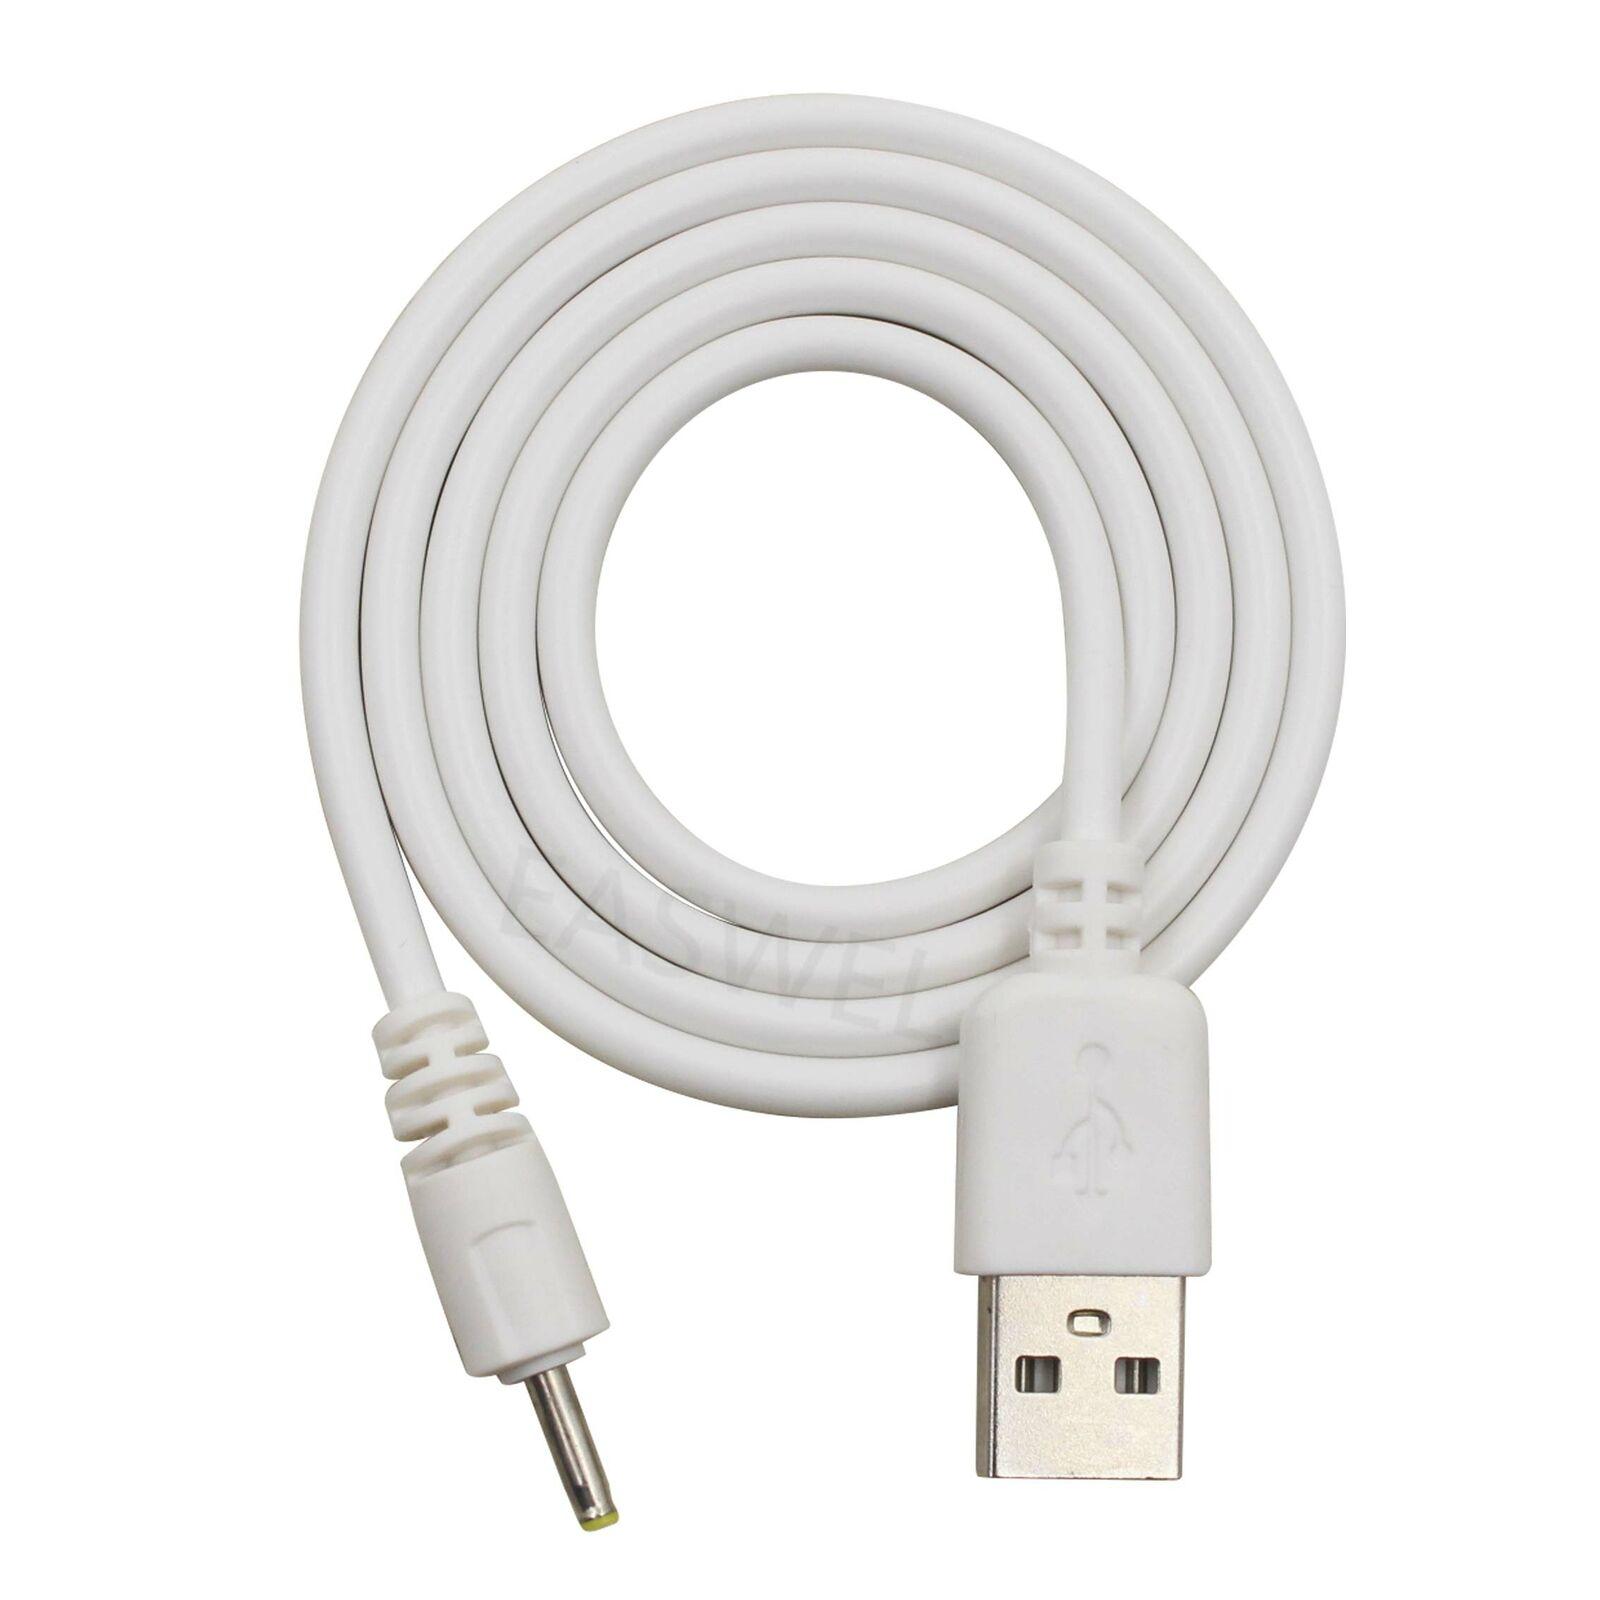 yan USB DC Charger Charging Cable Cord for Nextbook Premium 8 HD NX008HD8G Tablet PC